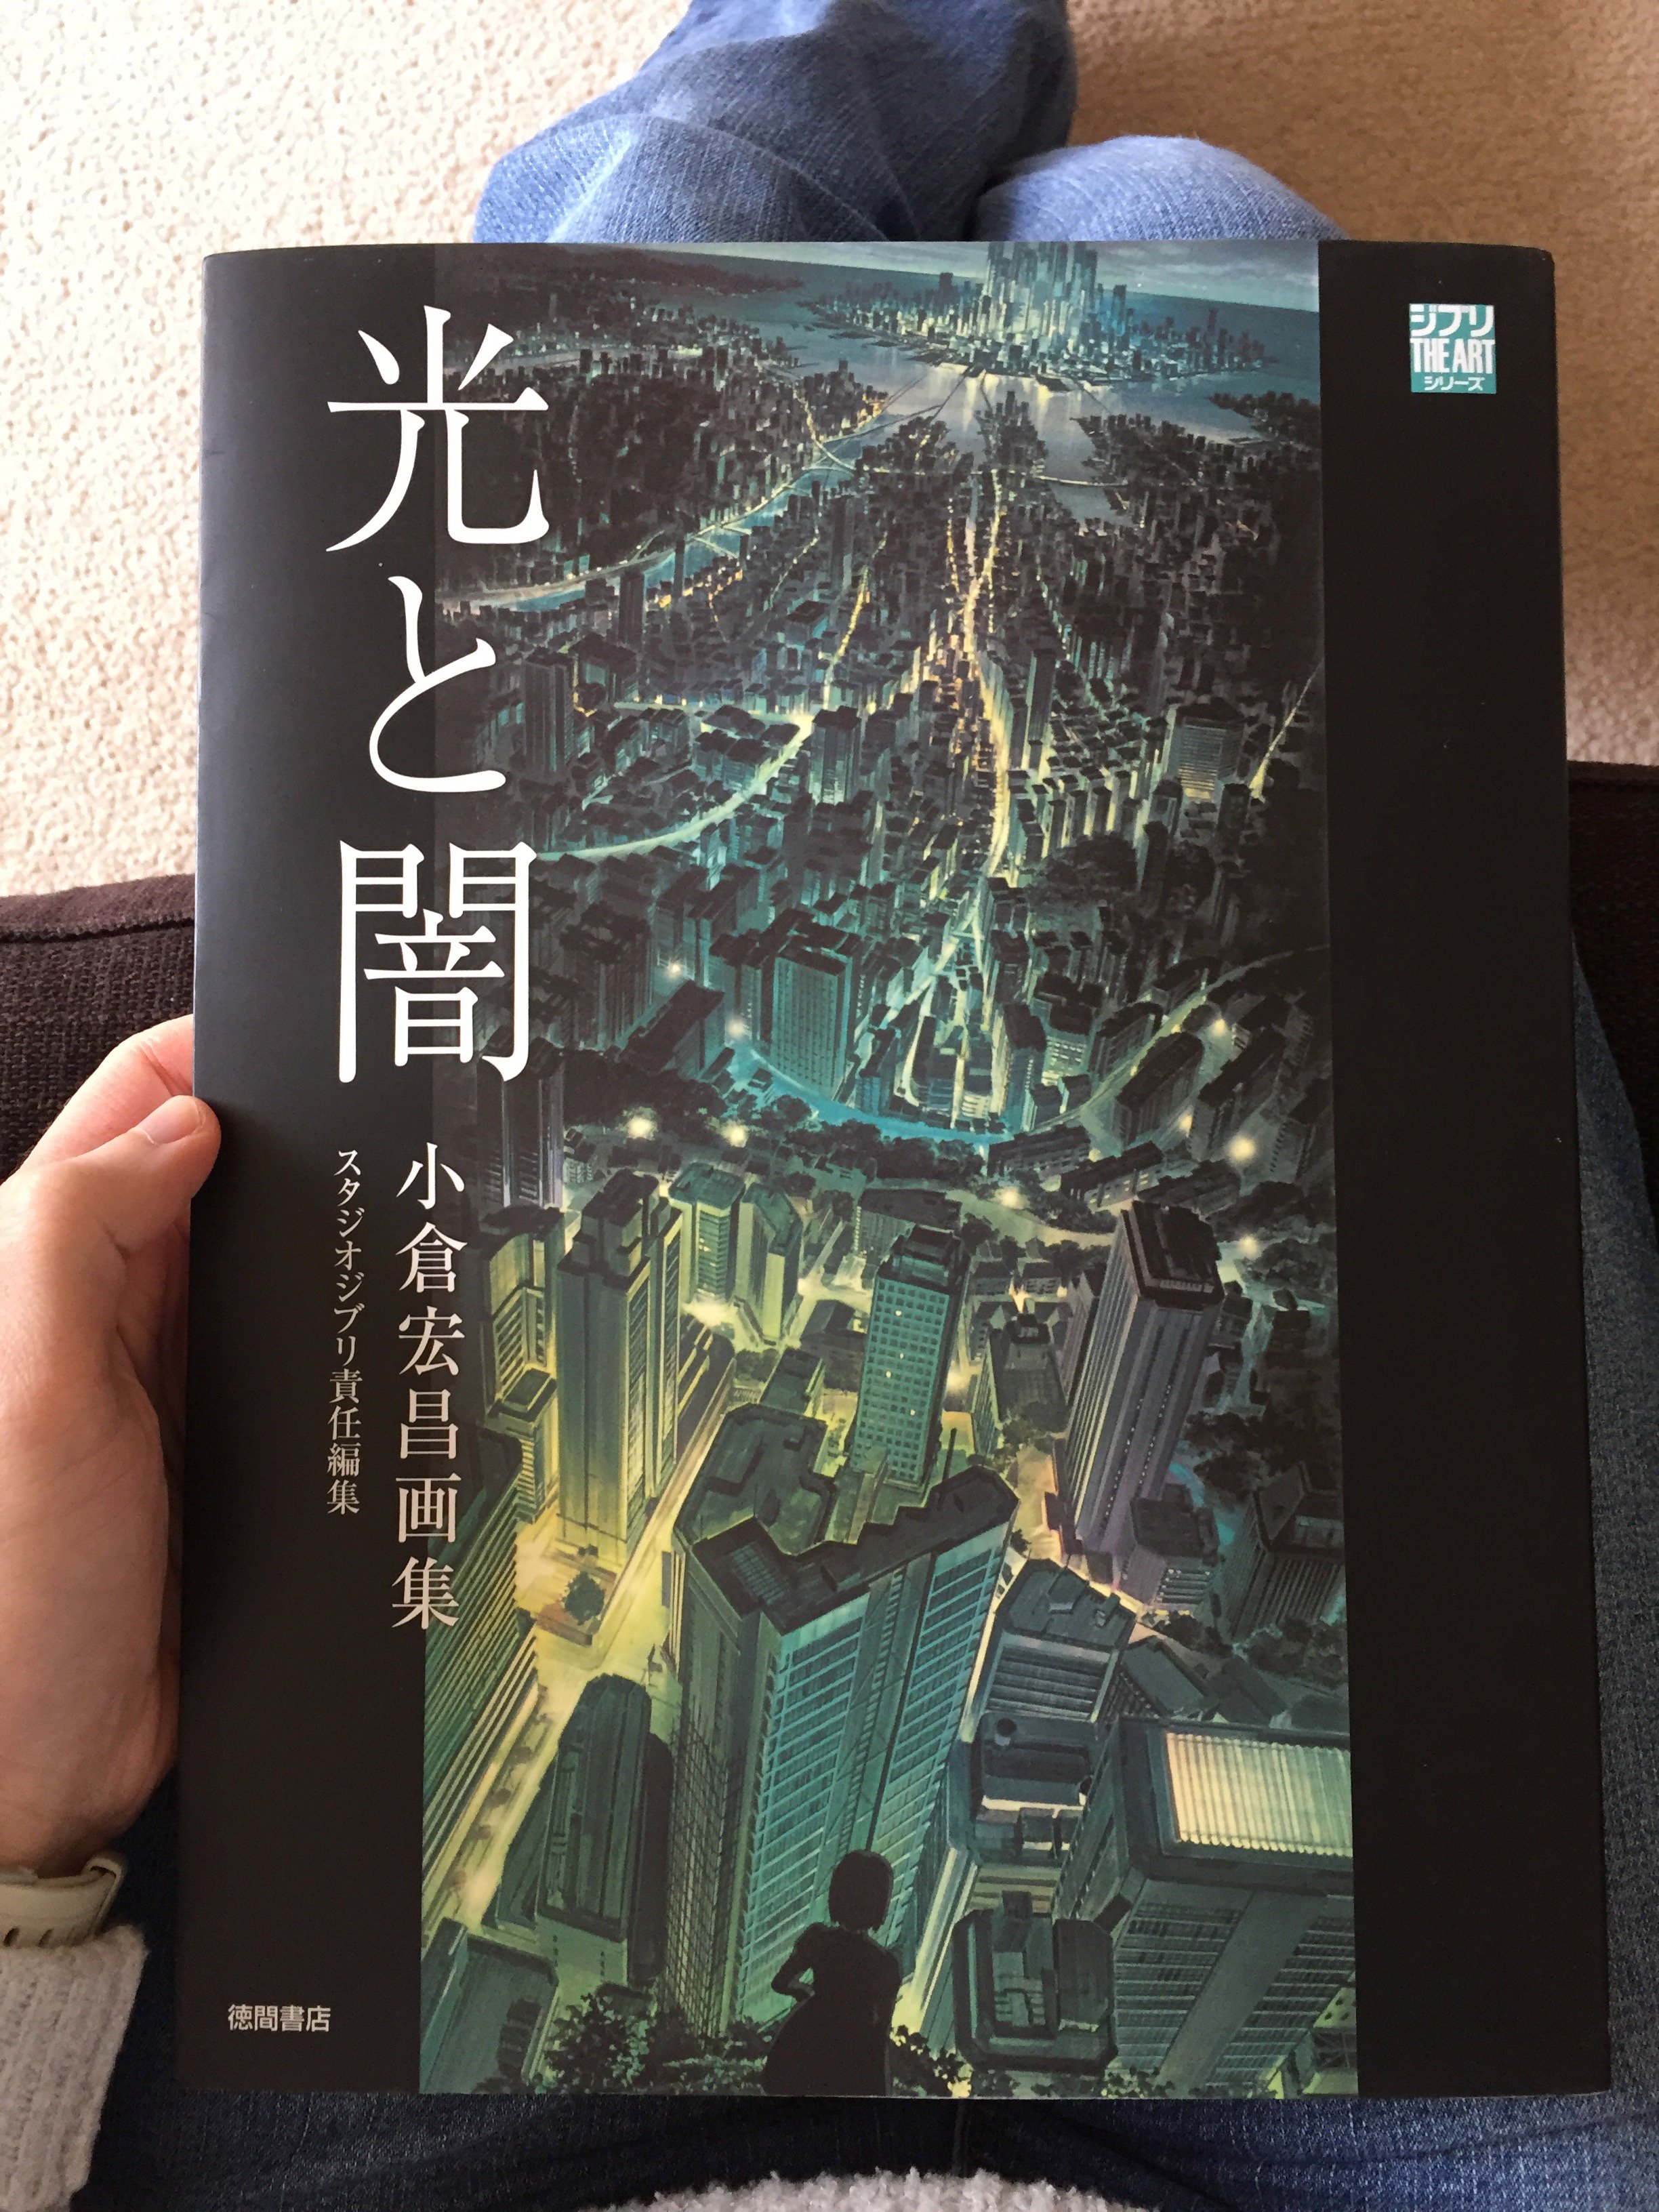 Zoe Blade I Bought An Art Book Of 小倉宏昌 S Anime Background Art Wings Of Honneamise Ghost In The Shell Was Not Disappointed T Co Bs5oj3bxin Twitter